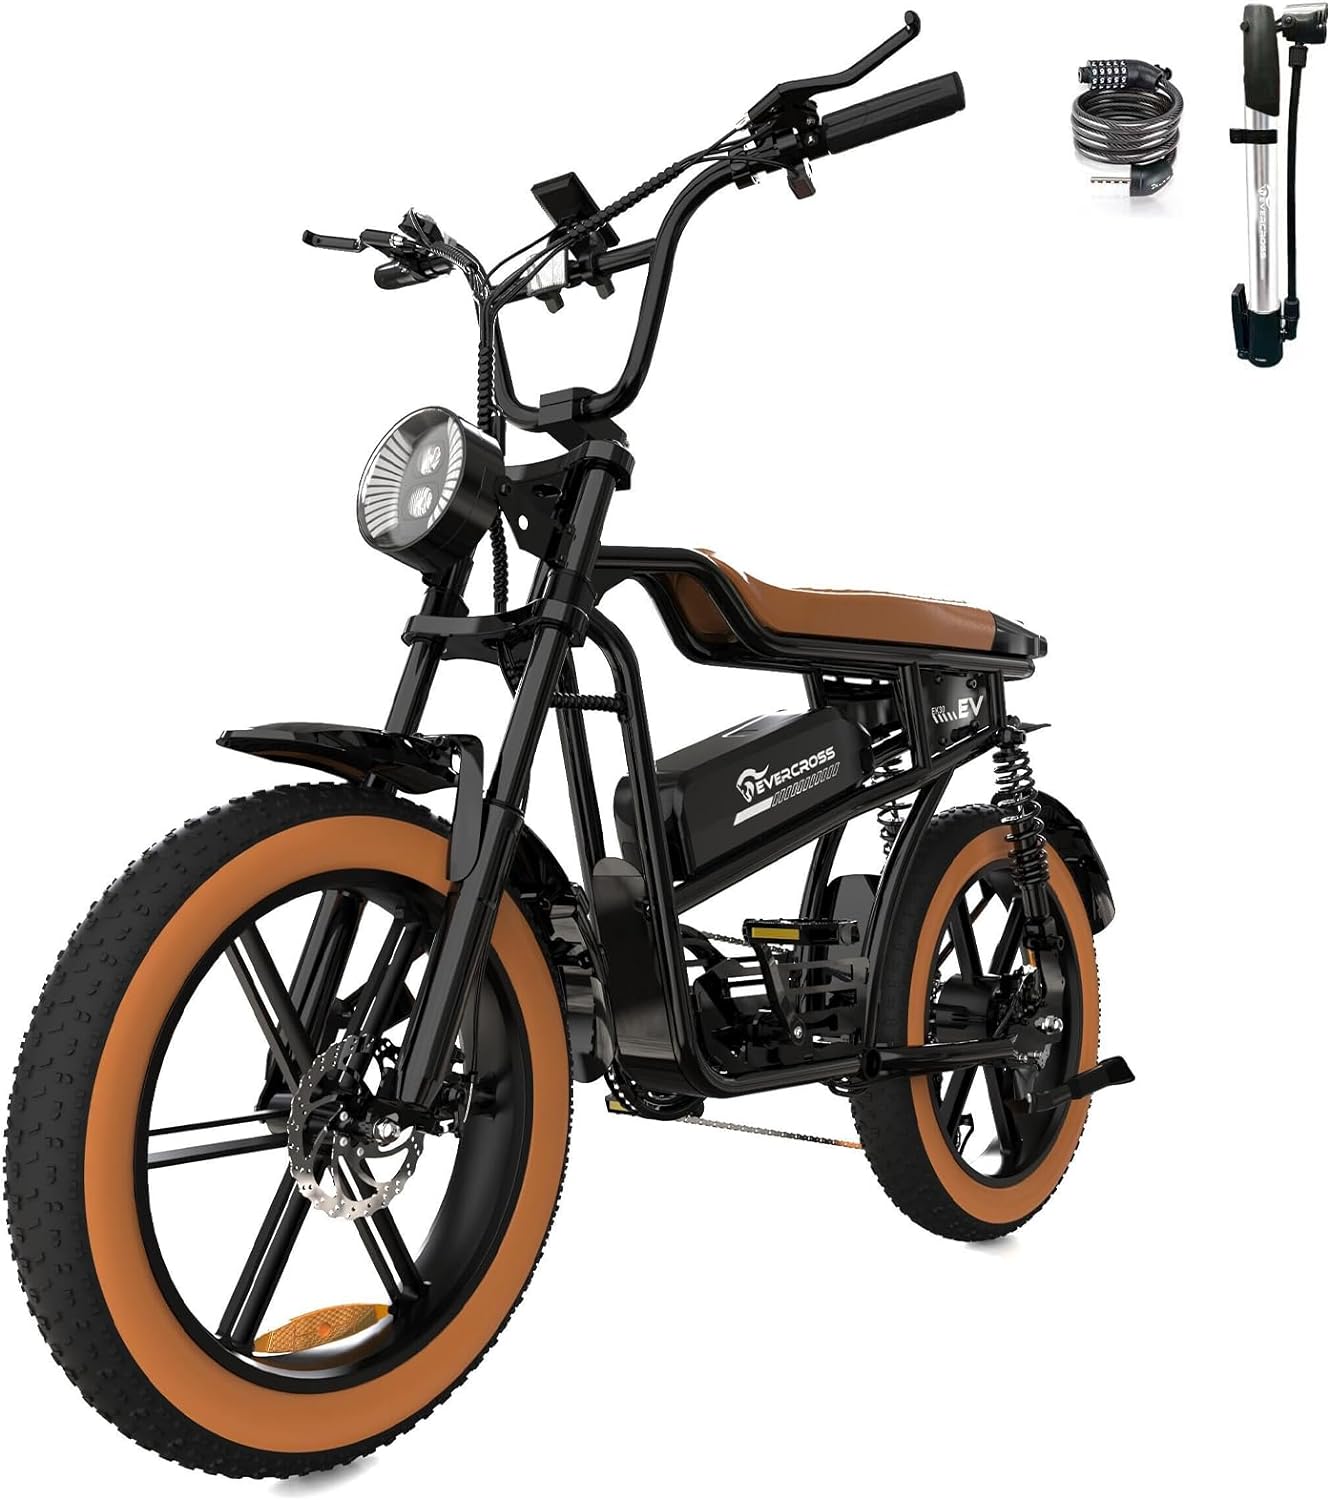 Evercross EK30 Electric Bike for Adults Available at Hoverboard Store